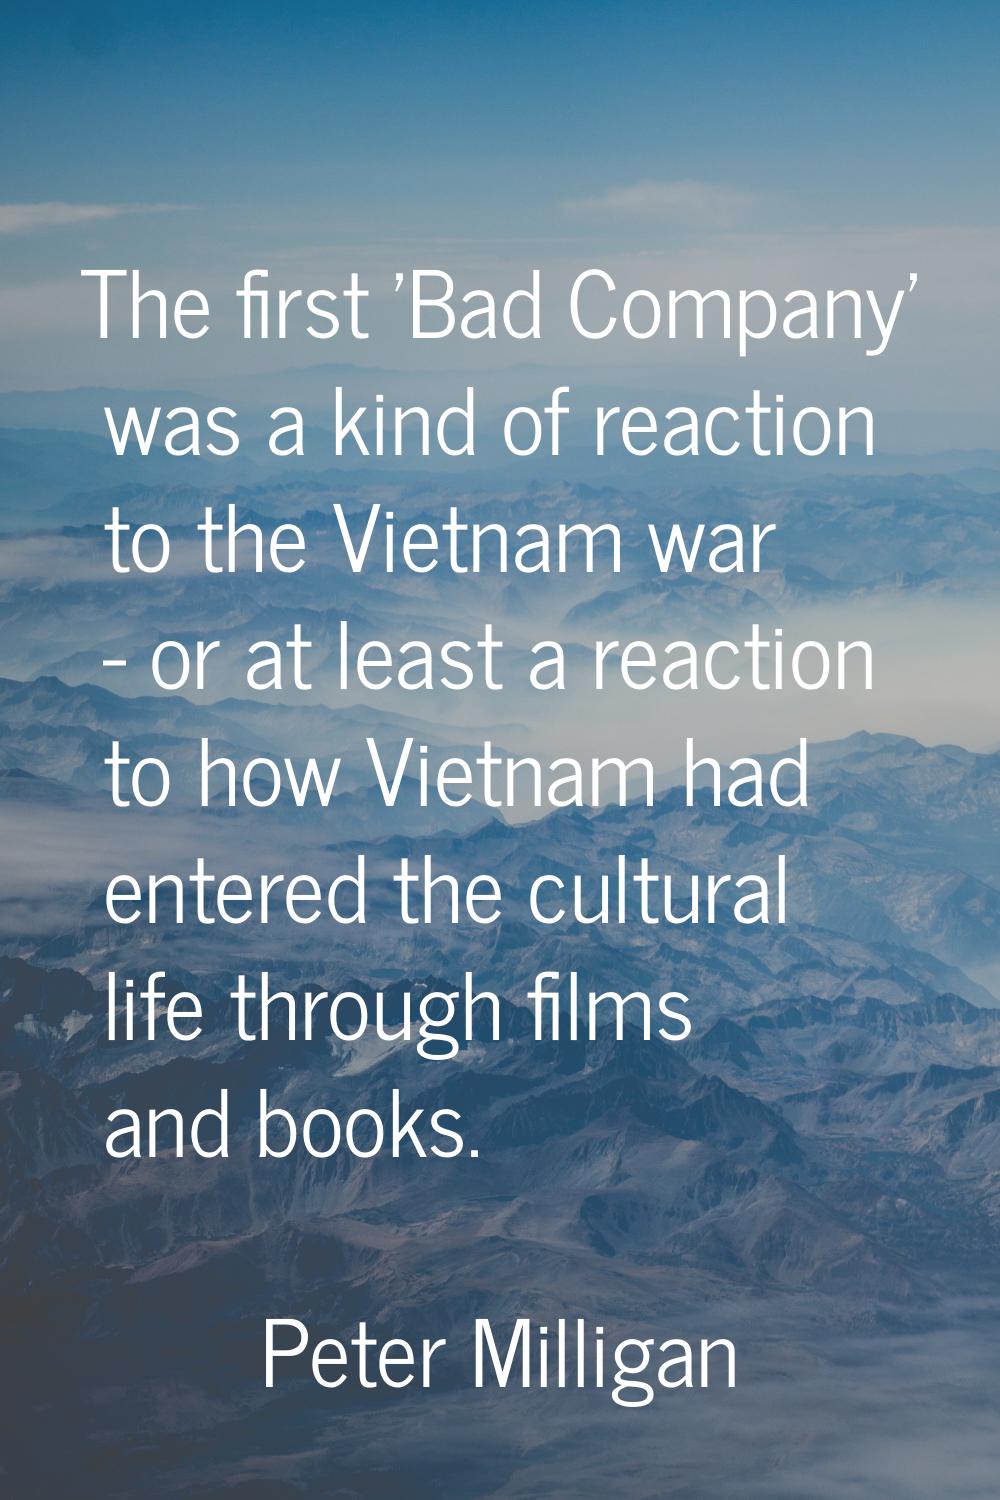 The first 'Bad Company' was a kind of reaction to the Vietnam war - or at least a reaction to how V